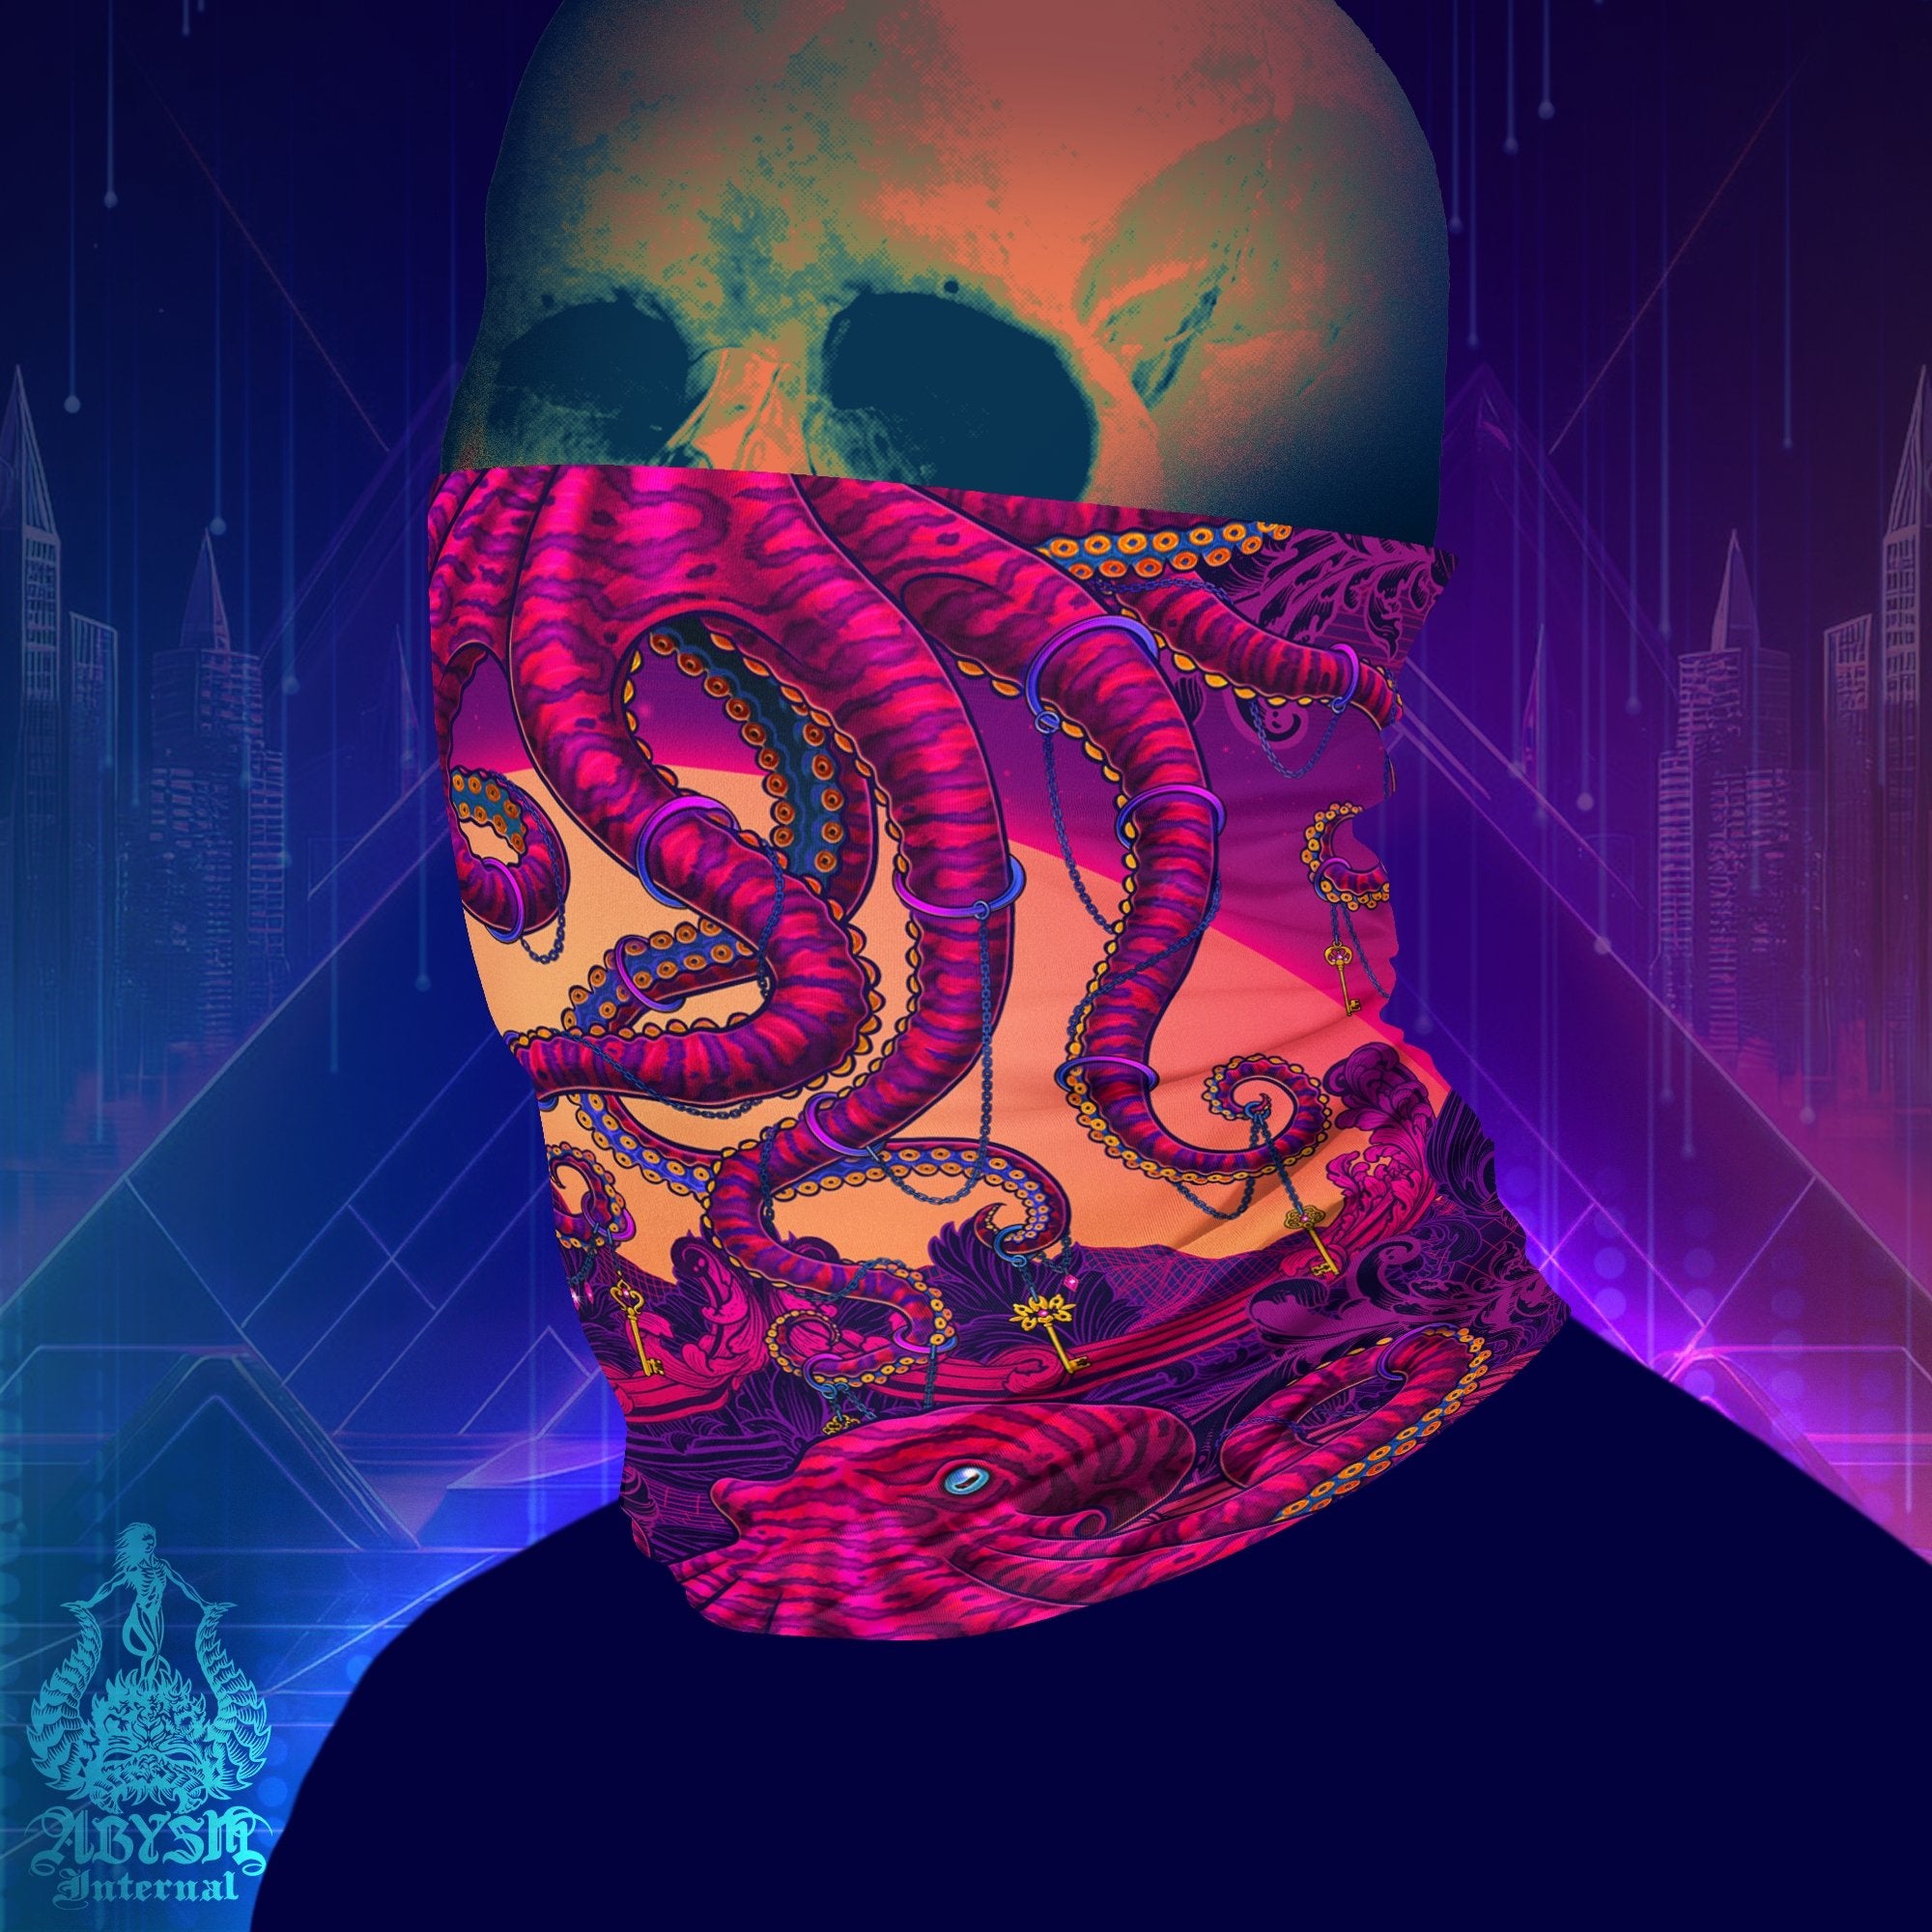 Psychedelic Neck Gaiter, Face Mask, Synthwave Head Covering, Vaporwave, 80s Retrowave, Rave Festival Outfit - Octopus - Abysm Internal